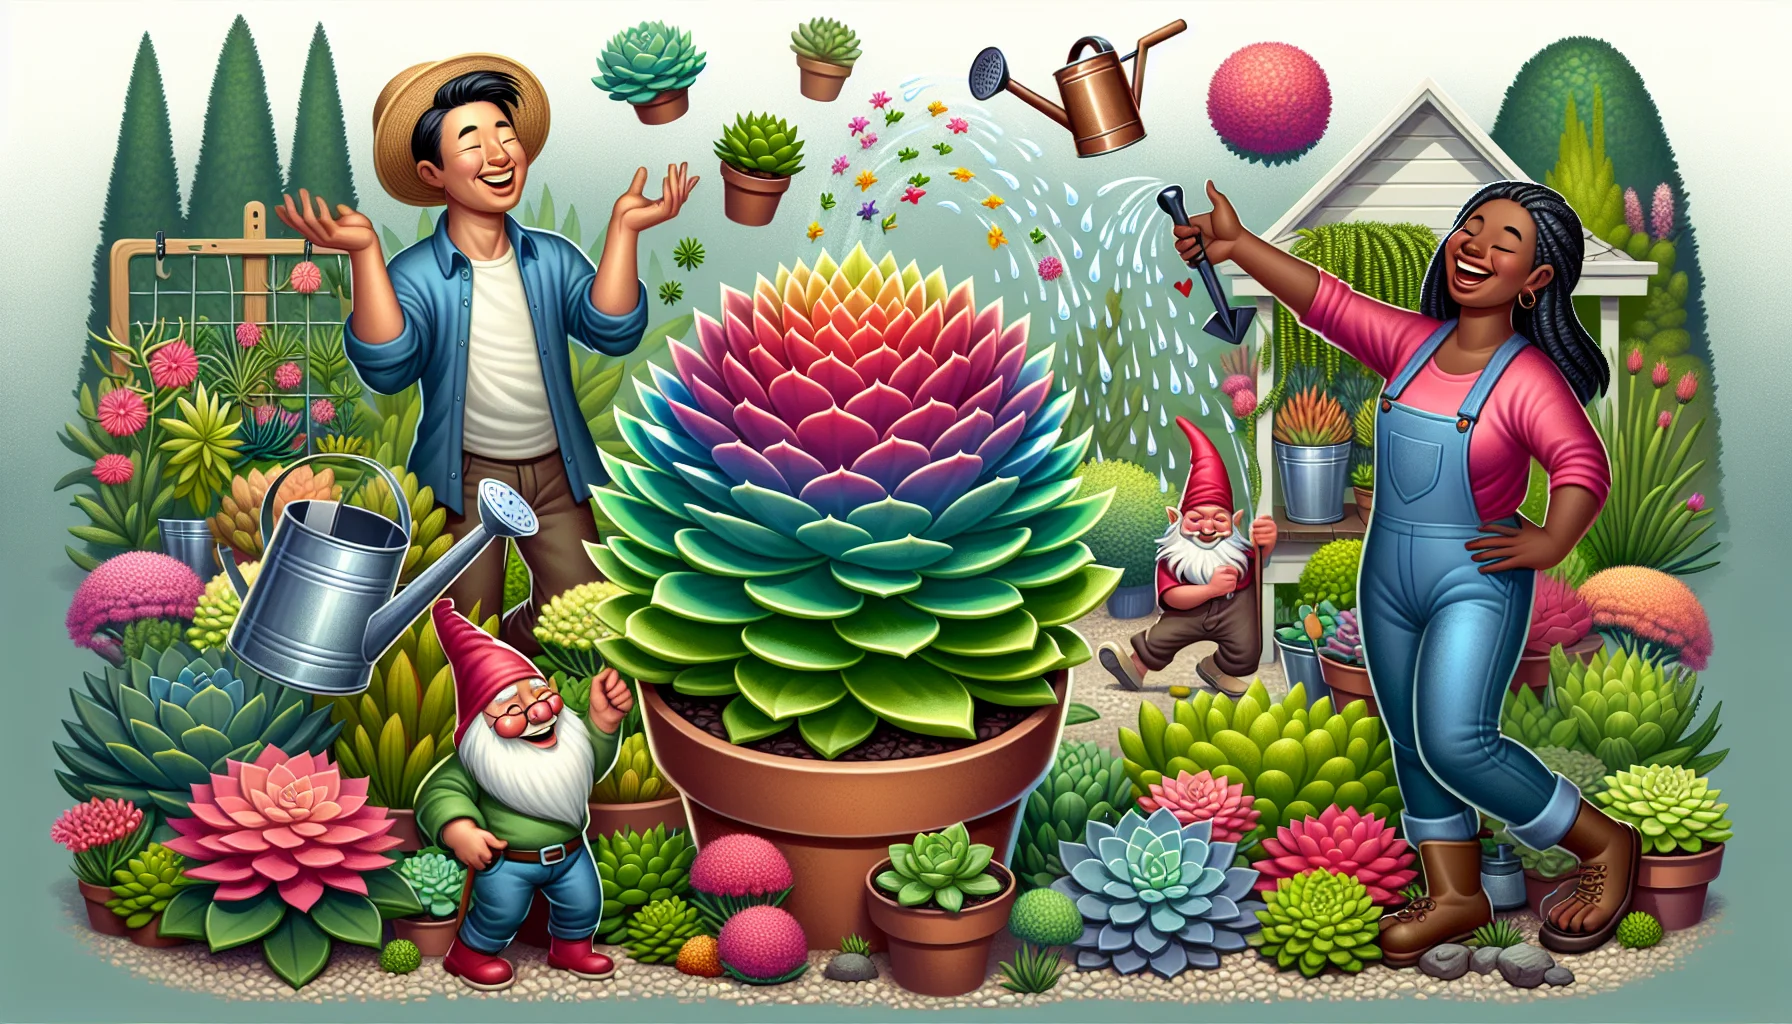 Design a brilliantly humorous and realistic image illustrating the care of sedum succulents in a gardening context. The focus of the image should be a multicolour Sedum succulent, and with it, scene includes an Asian man who is juggling watering cans while taking care of the plant and a Black woman laughing and planting additional succulents. To encompass the charm of gardening, there might be a dancing gnome nearby, join into the hilarity. Ensure that the environment around them reflects a beautiful, well-kept garden, blooming with plants of different varieties and colors.